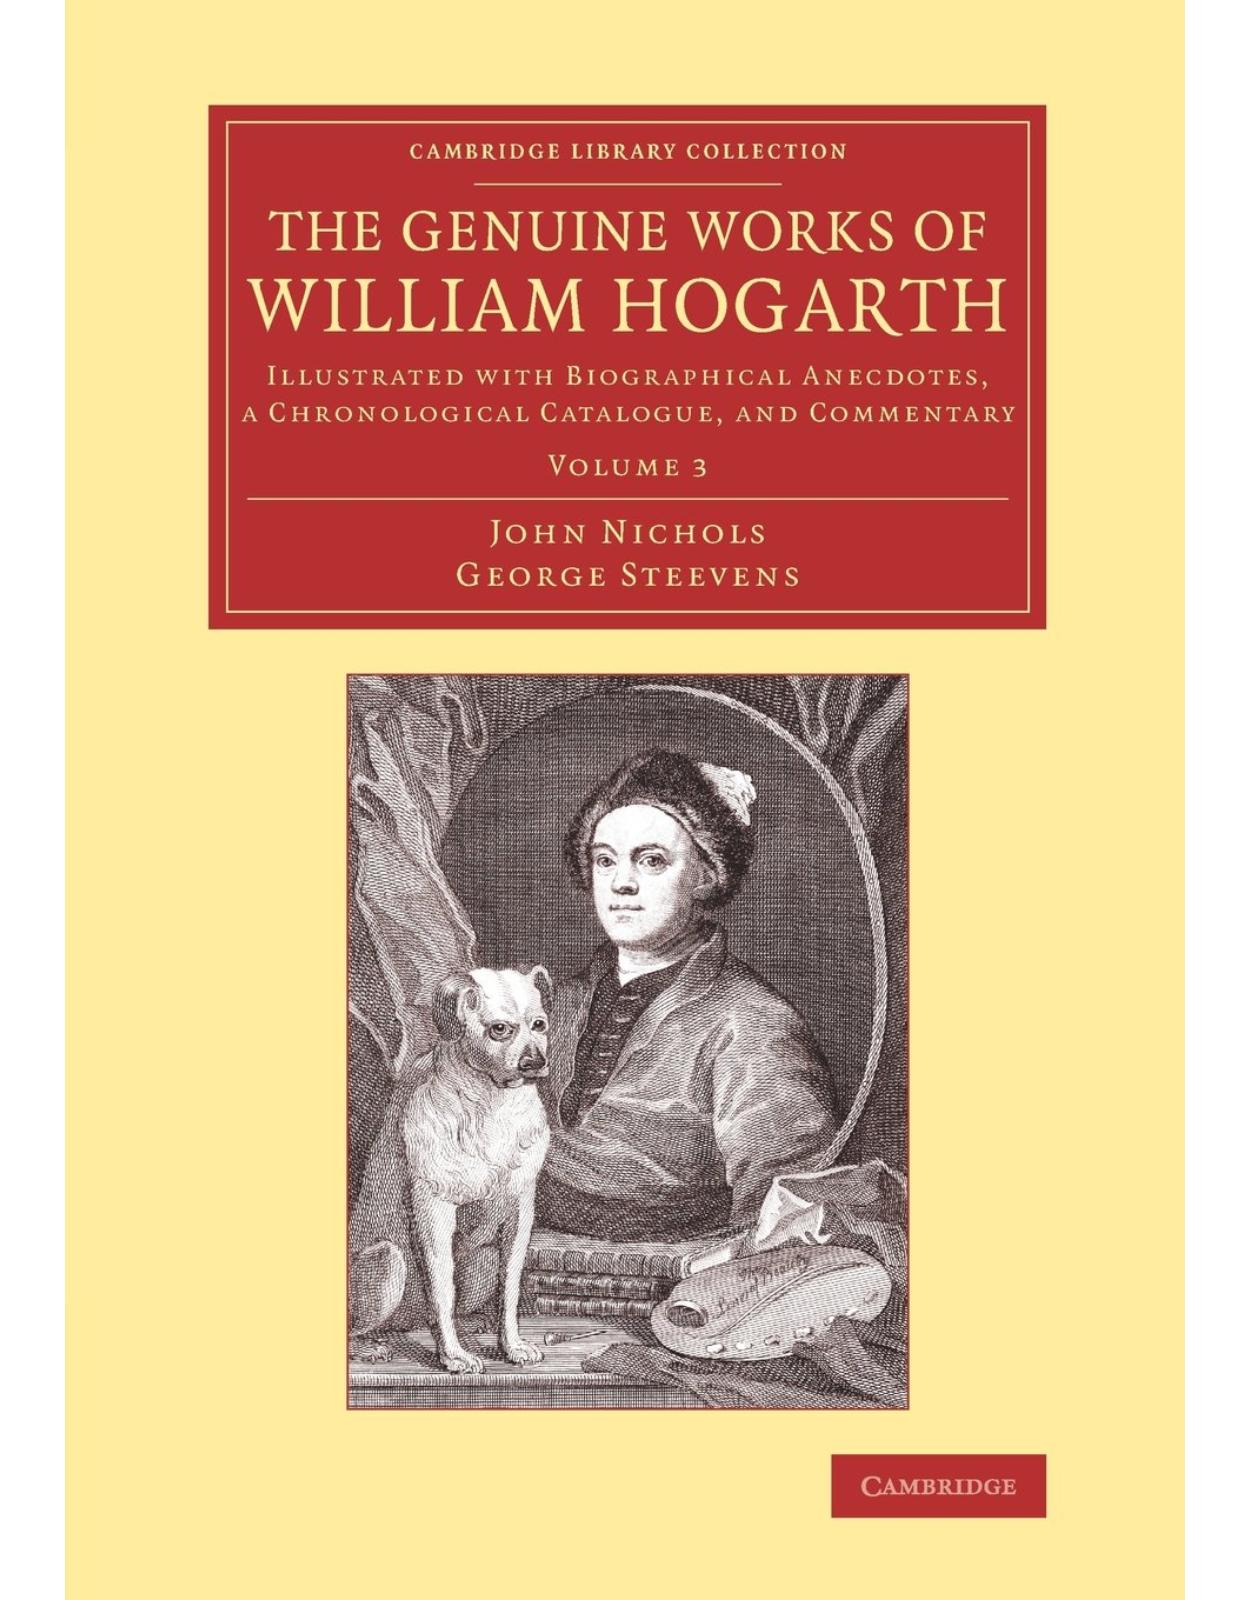 The Genuine Works of William Hogarth 3 Volume Set: Illustrated with Biographical Anecdotes, a Chronological Catalogue, and Commentary (Cambridge Library Collection - Art and Architecture) Paperback